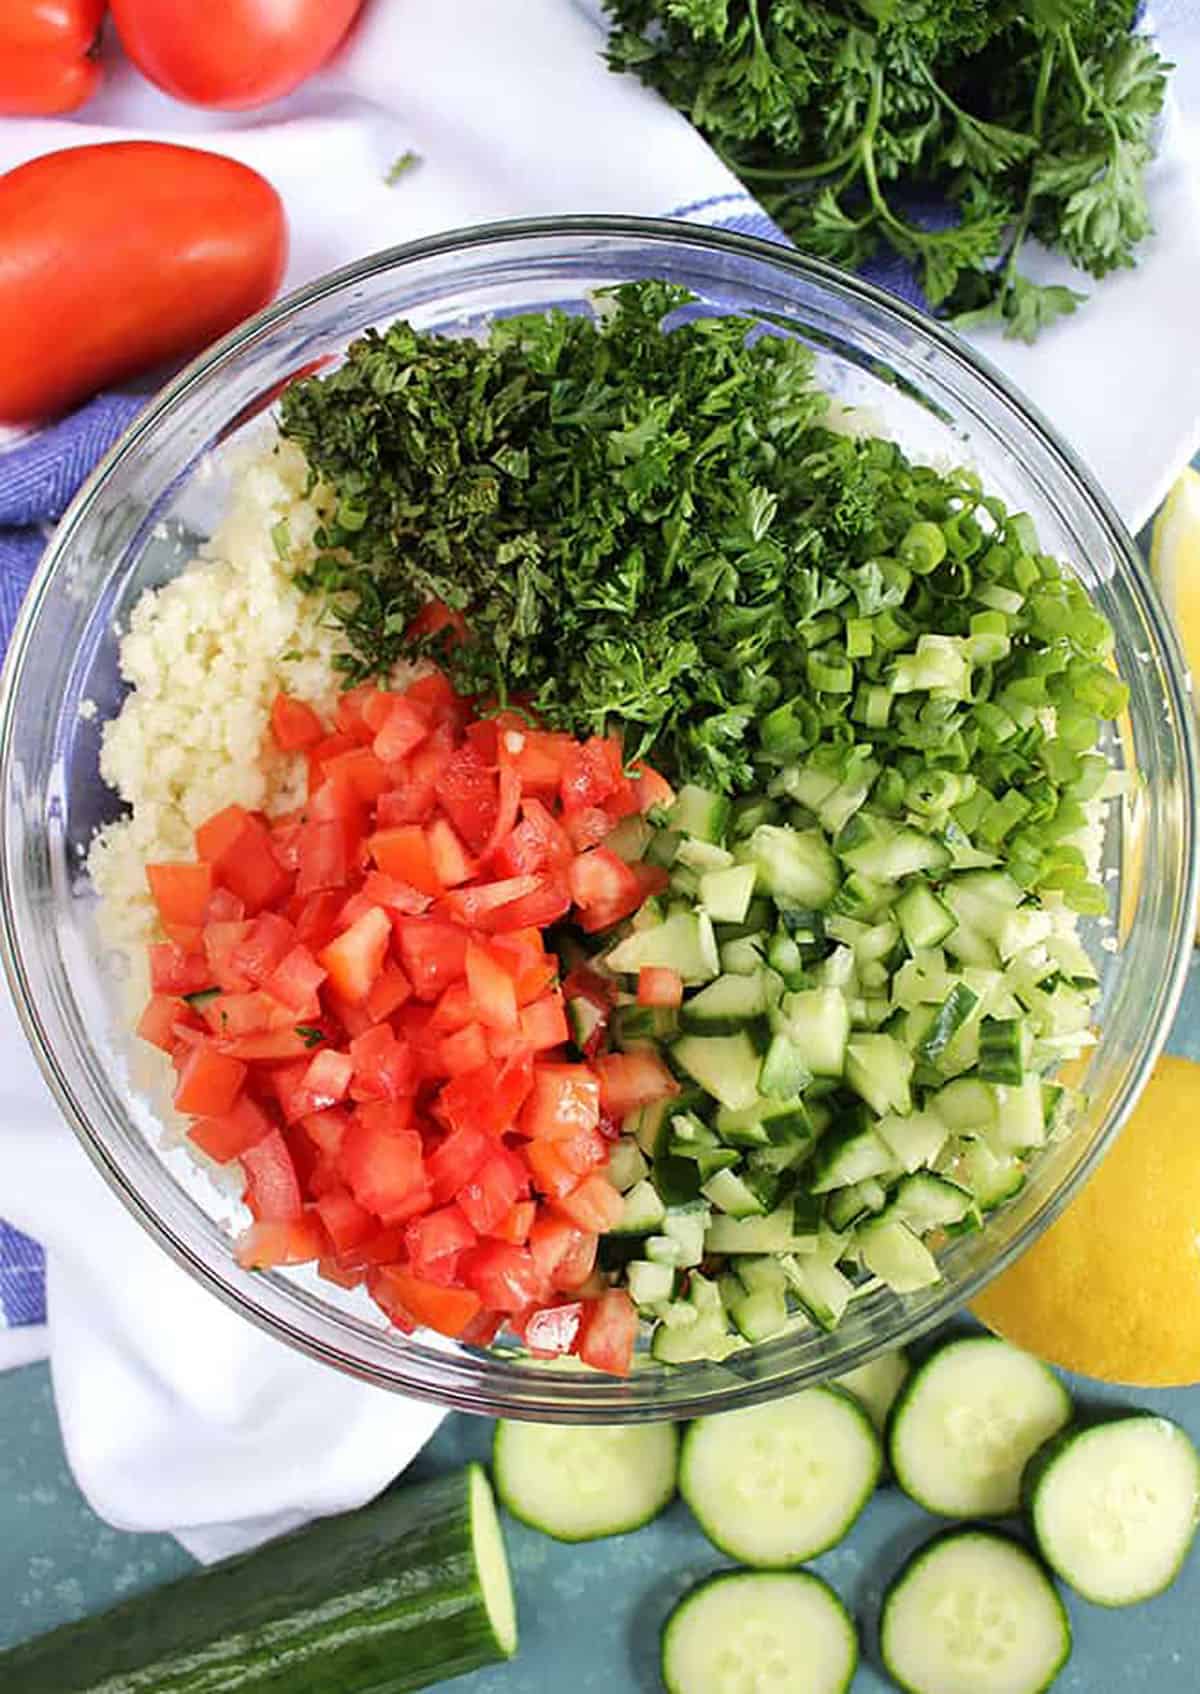 Ingredients for Cauliflower Rice Tabbouleh Salad in a glass bowl with cucumbers, lemons and tomatoes 